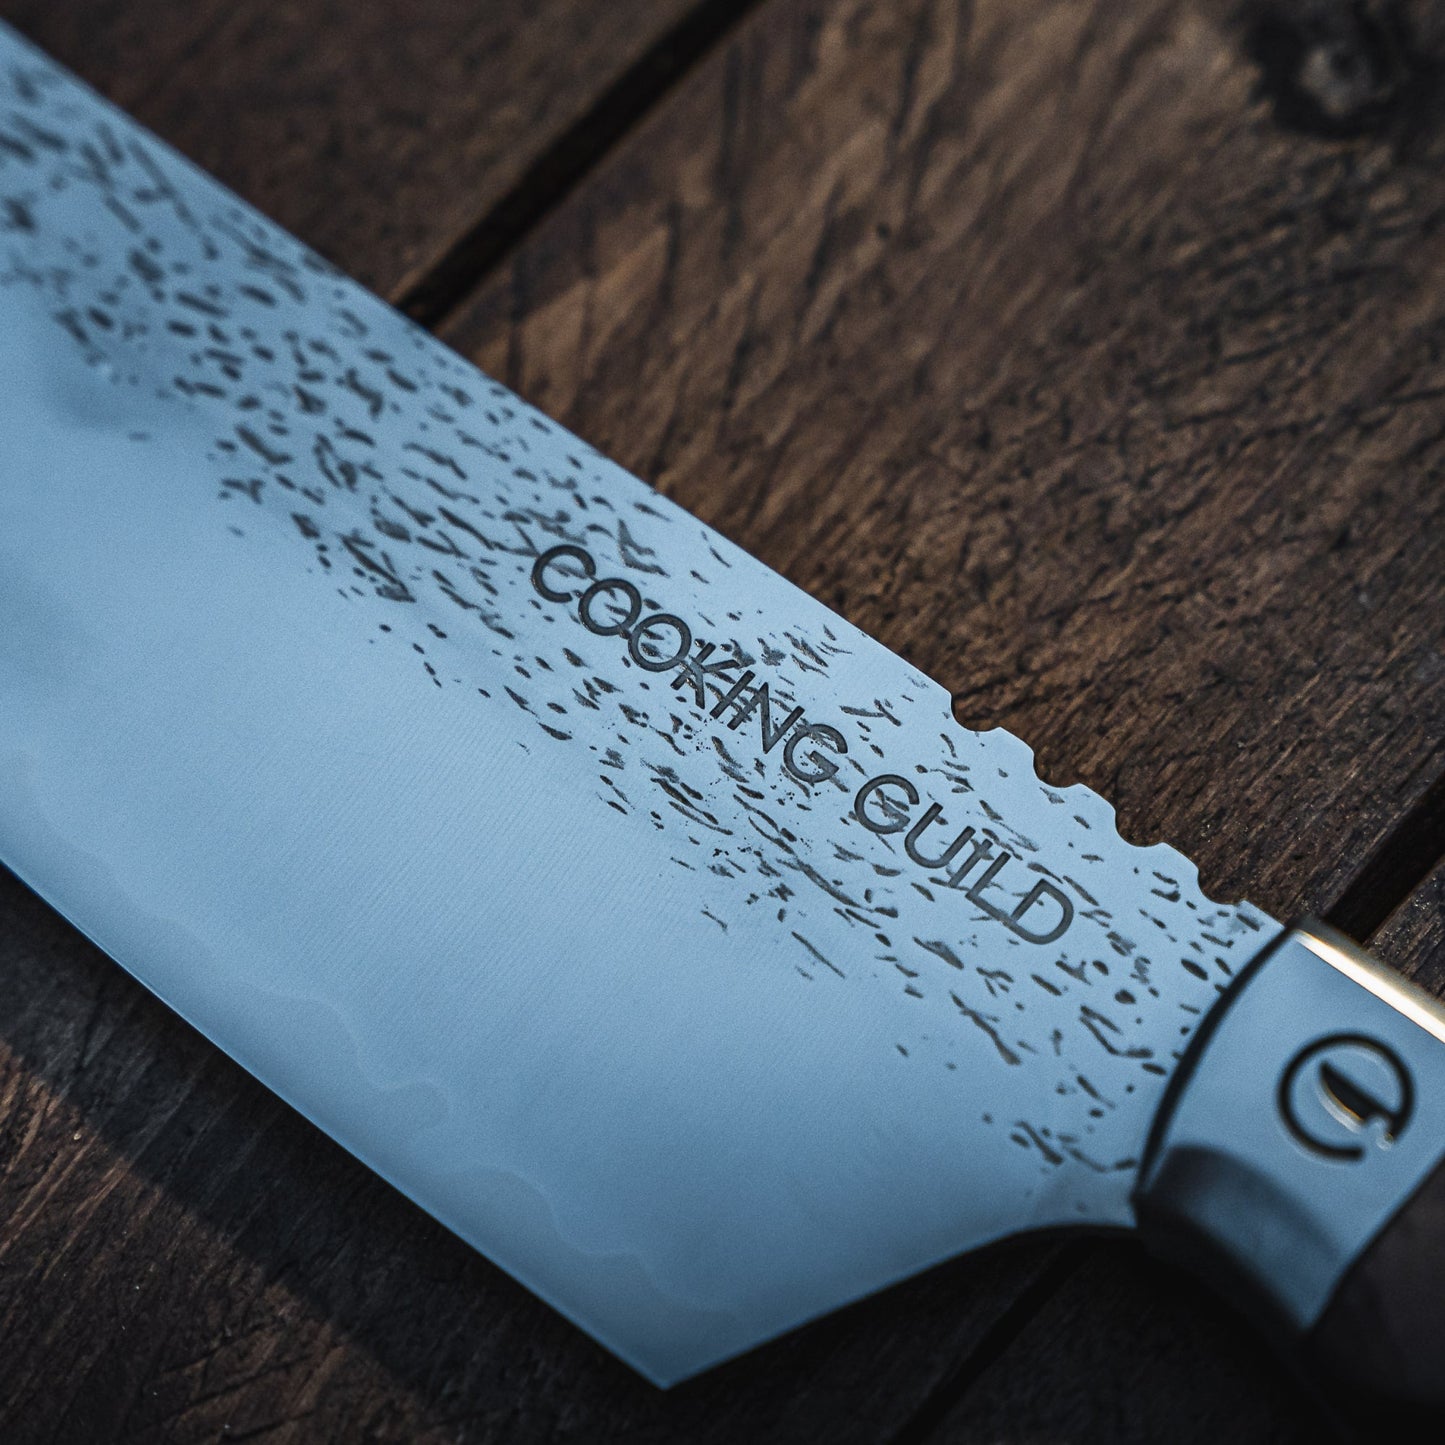 DS24 Grizzly Chef knife